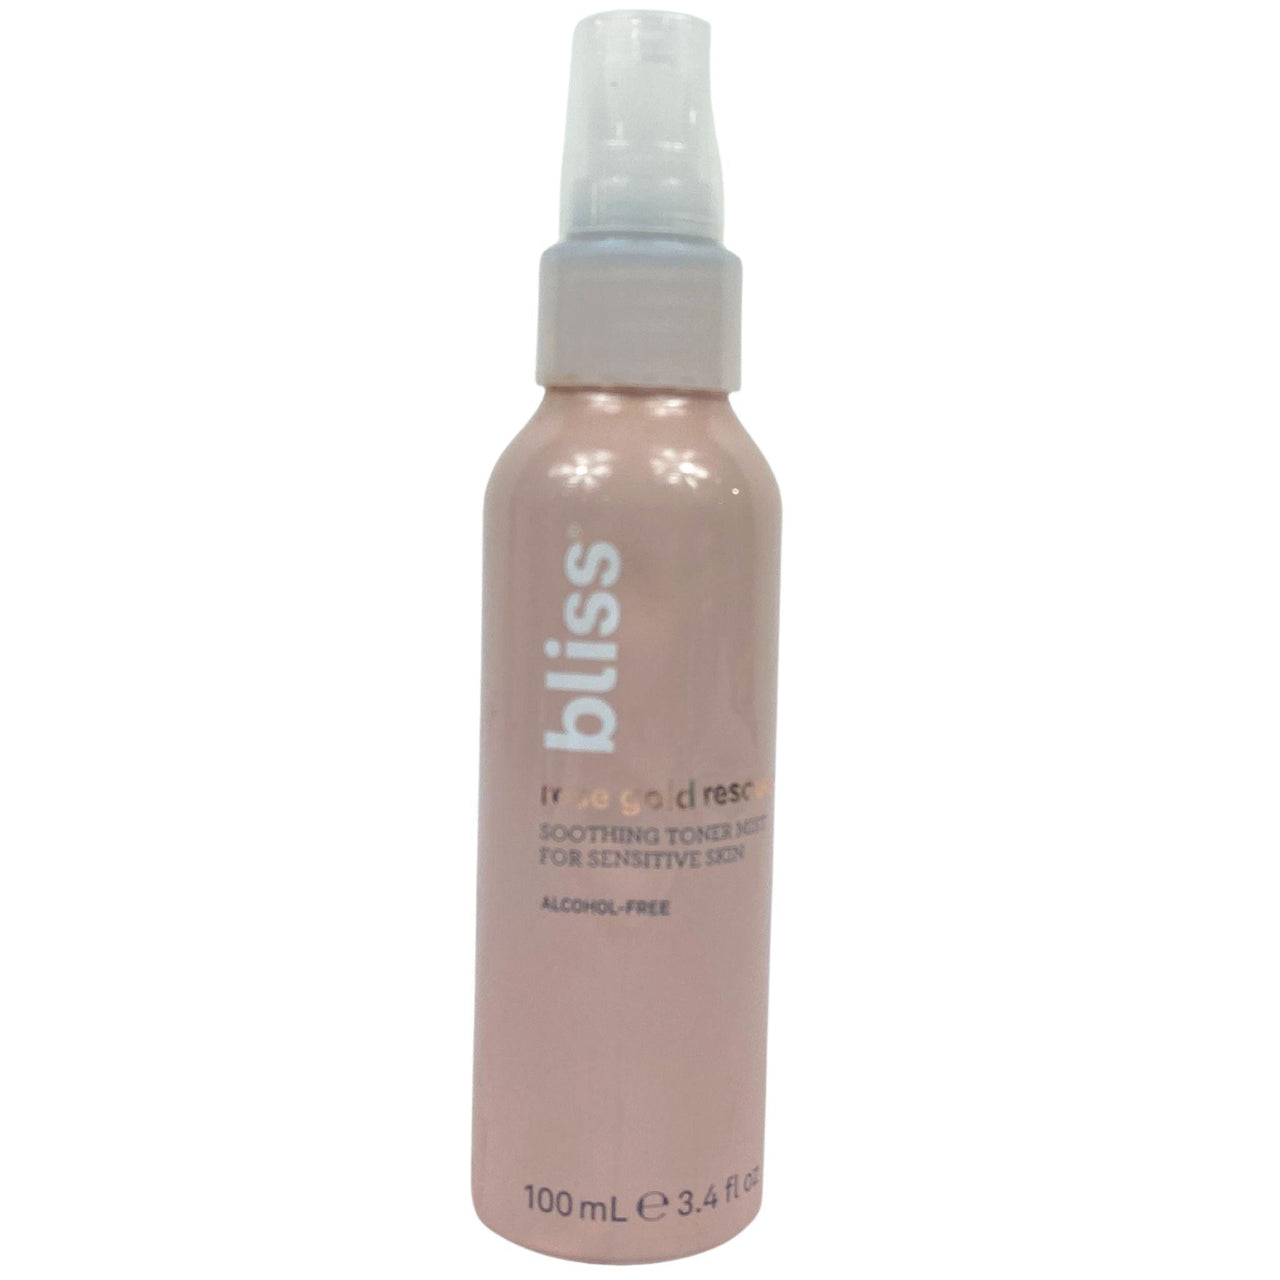 Bliss Rose Gold Rescue Soothing Toner Mist for Sensitive Skin (60 Pcs Lot) - Discount Wholesalers Inc